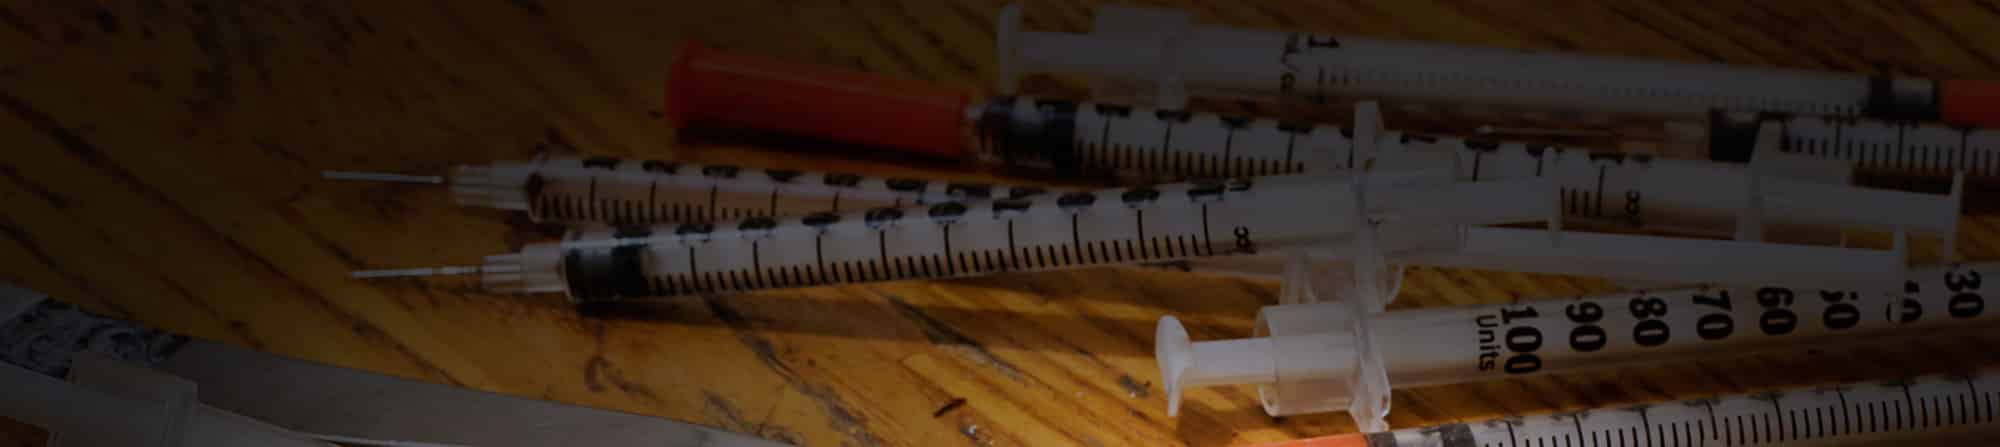 A pile of syringes on wood surface